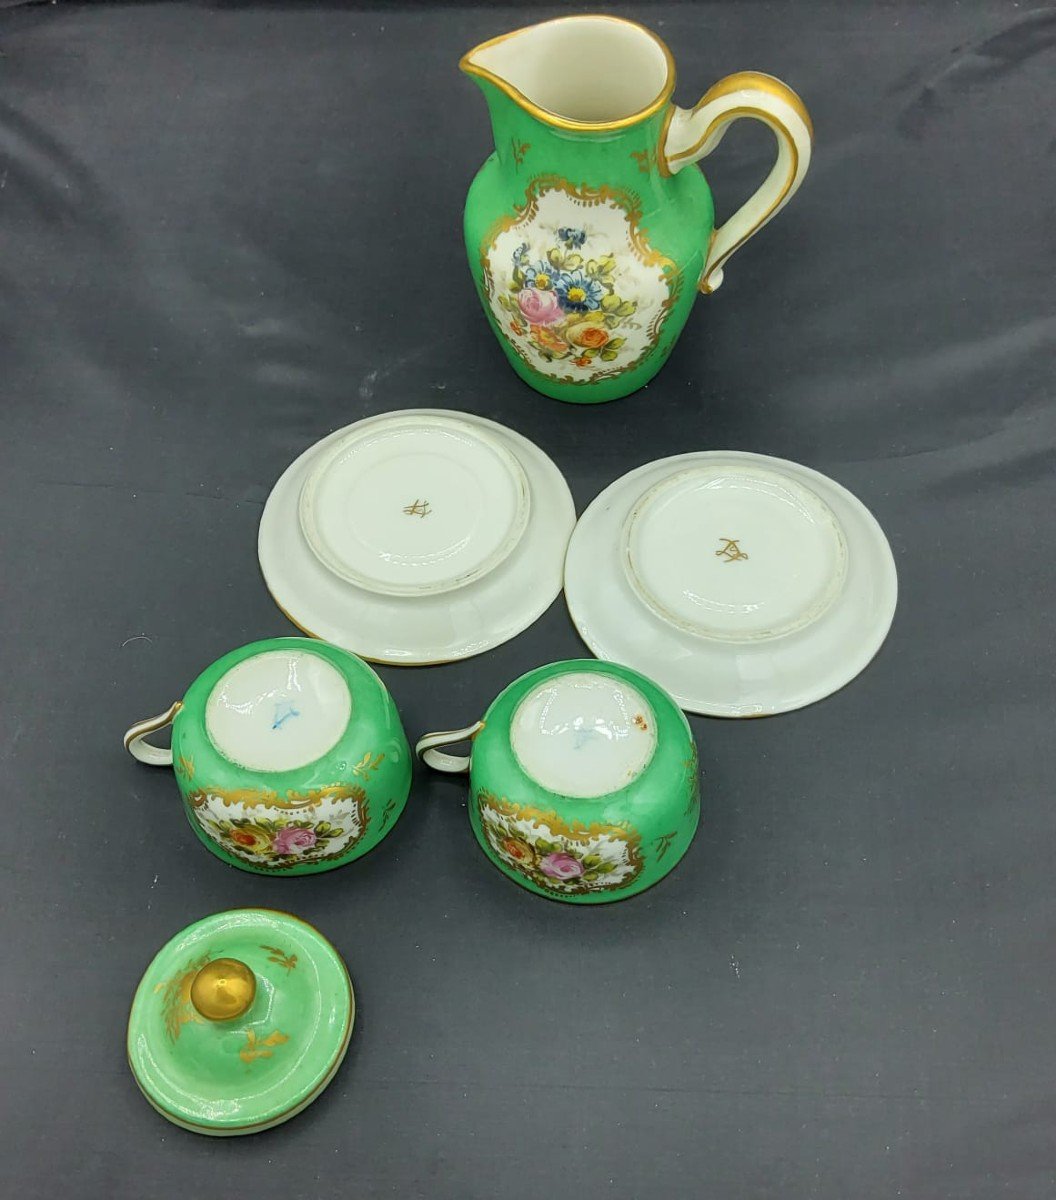 Sèvres Style Tête-à-tete Coffee Service In Emerald Green Painted With Bouquets Of Flowers-photo-2